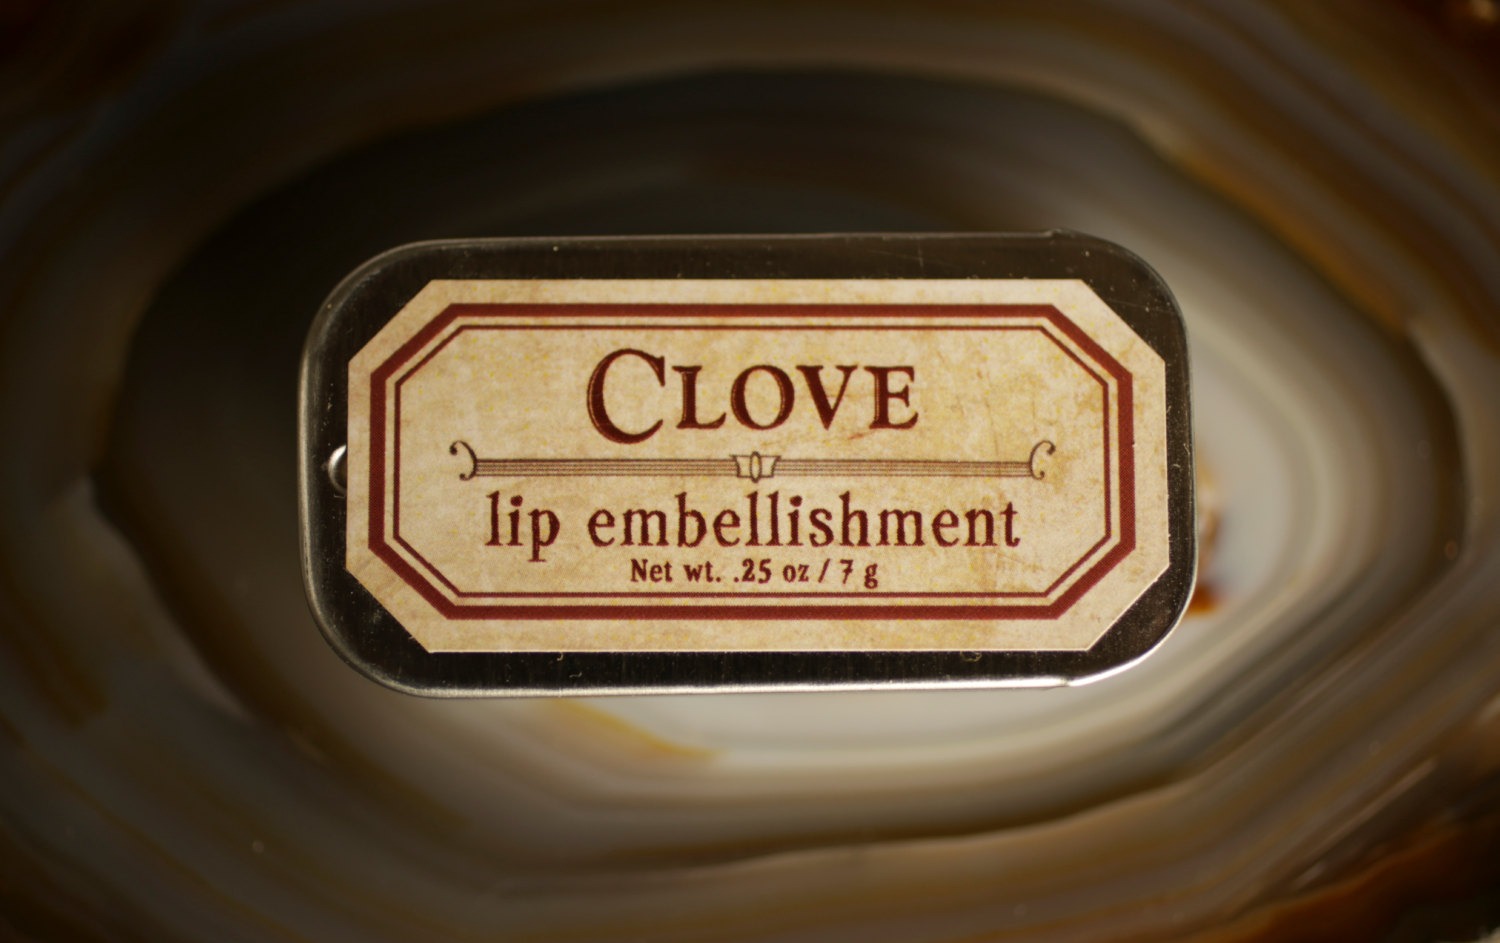 Clove - natural lip balm tin with beeswax, cocoa butter, forest-inspired organic and natural flavor steampunk buy now online